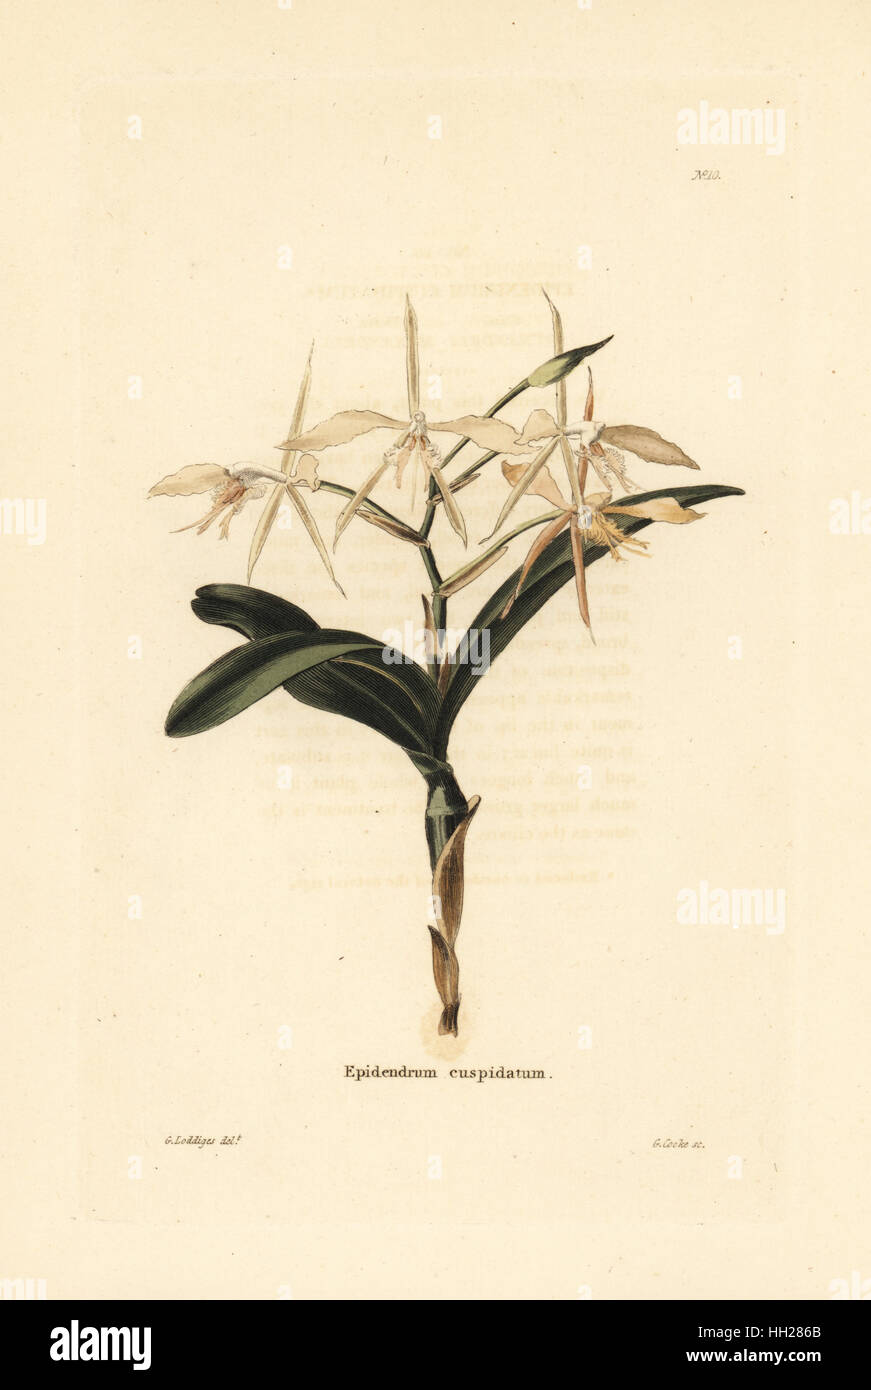 Fringed star orchid, Epidendrum ciliare (Epidendrum cuspidatum). Handcoloured copperplate engraving by George Cooke after George Loddiges from Conrad Loddiges' Botanical Cabinet, Hackney, 1817. Stock Photo